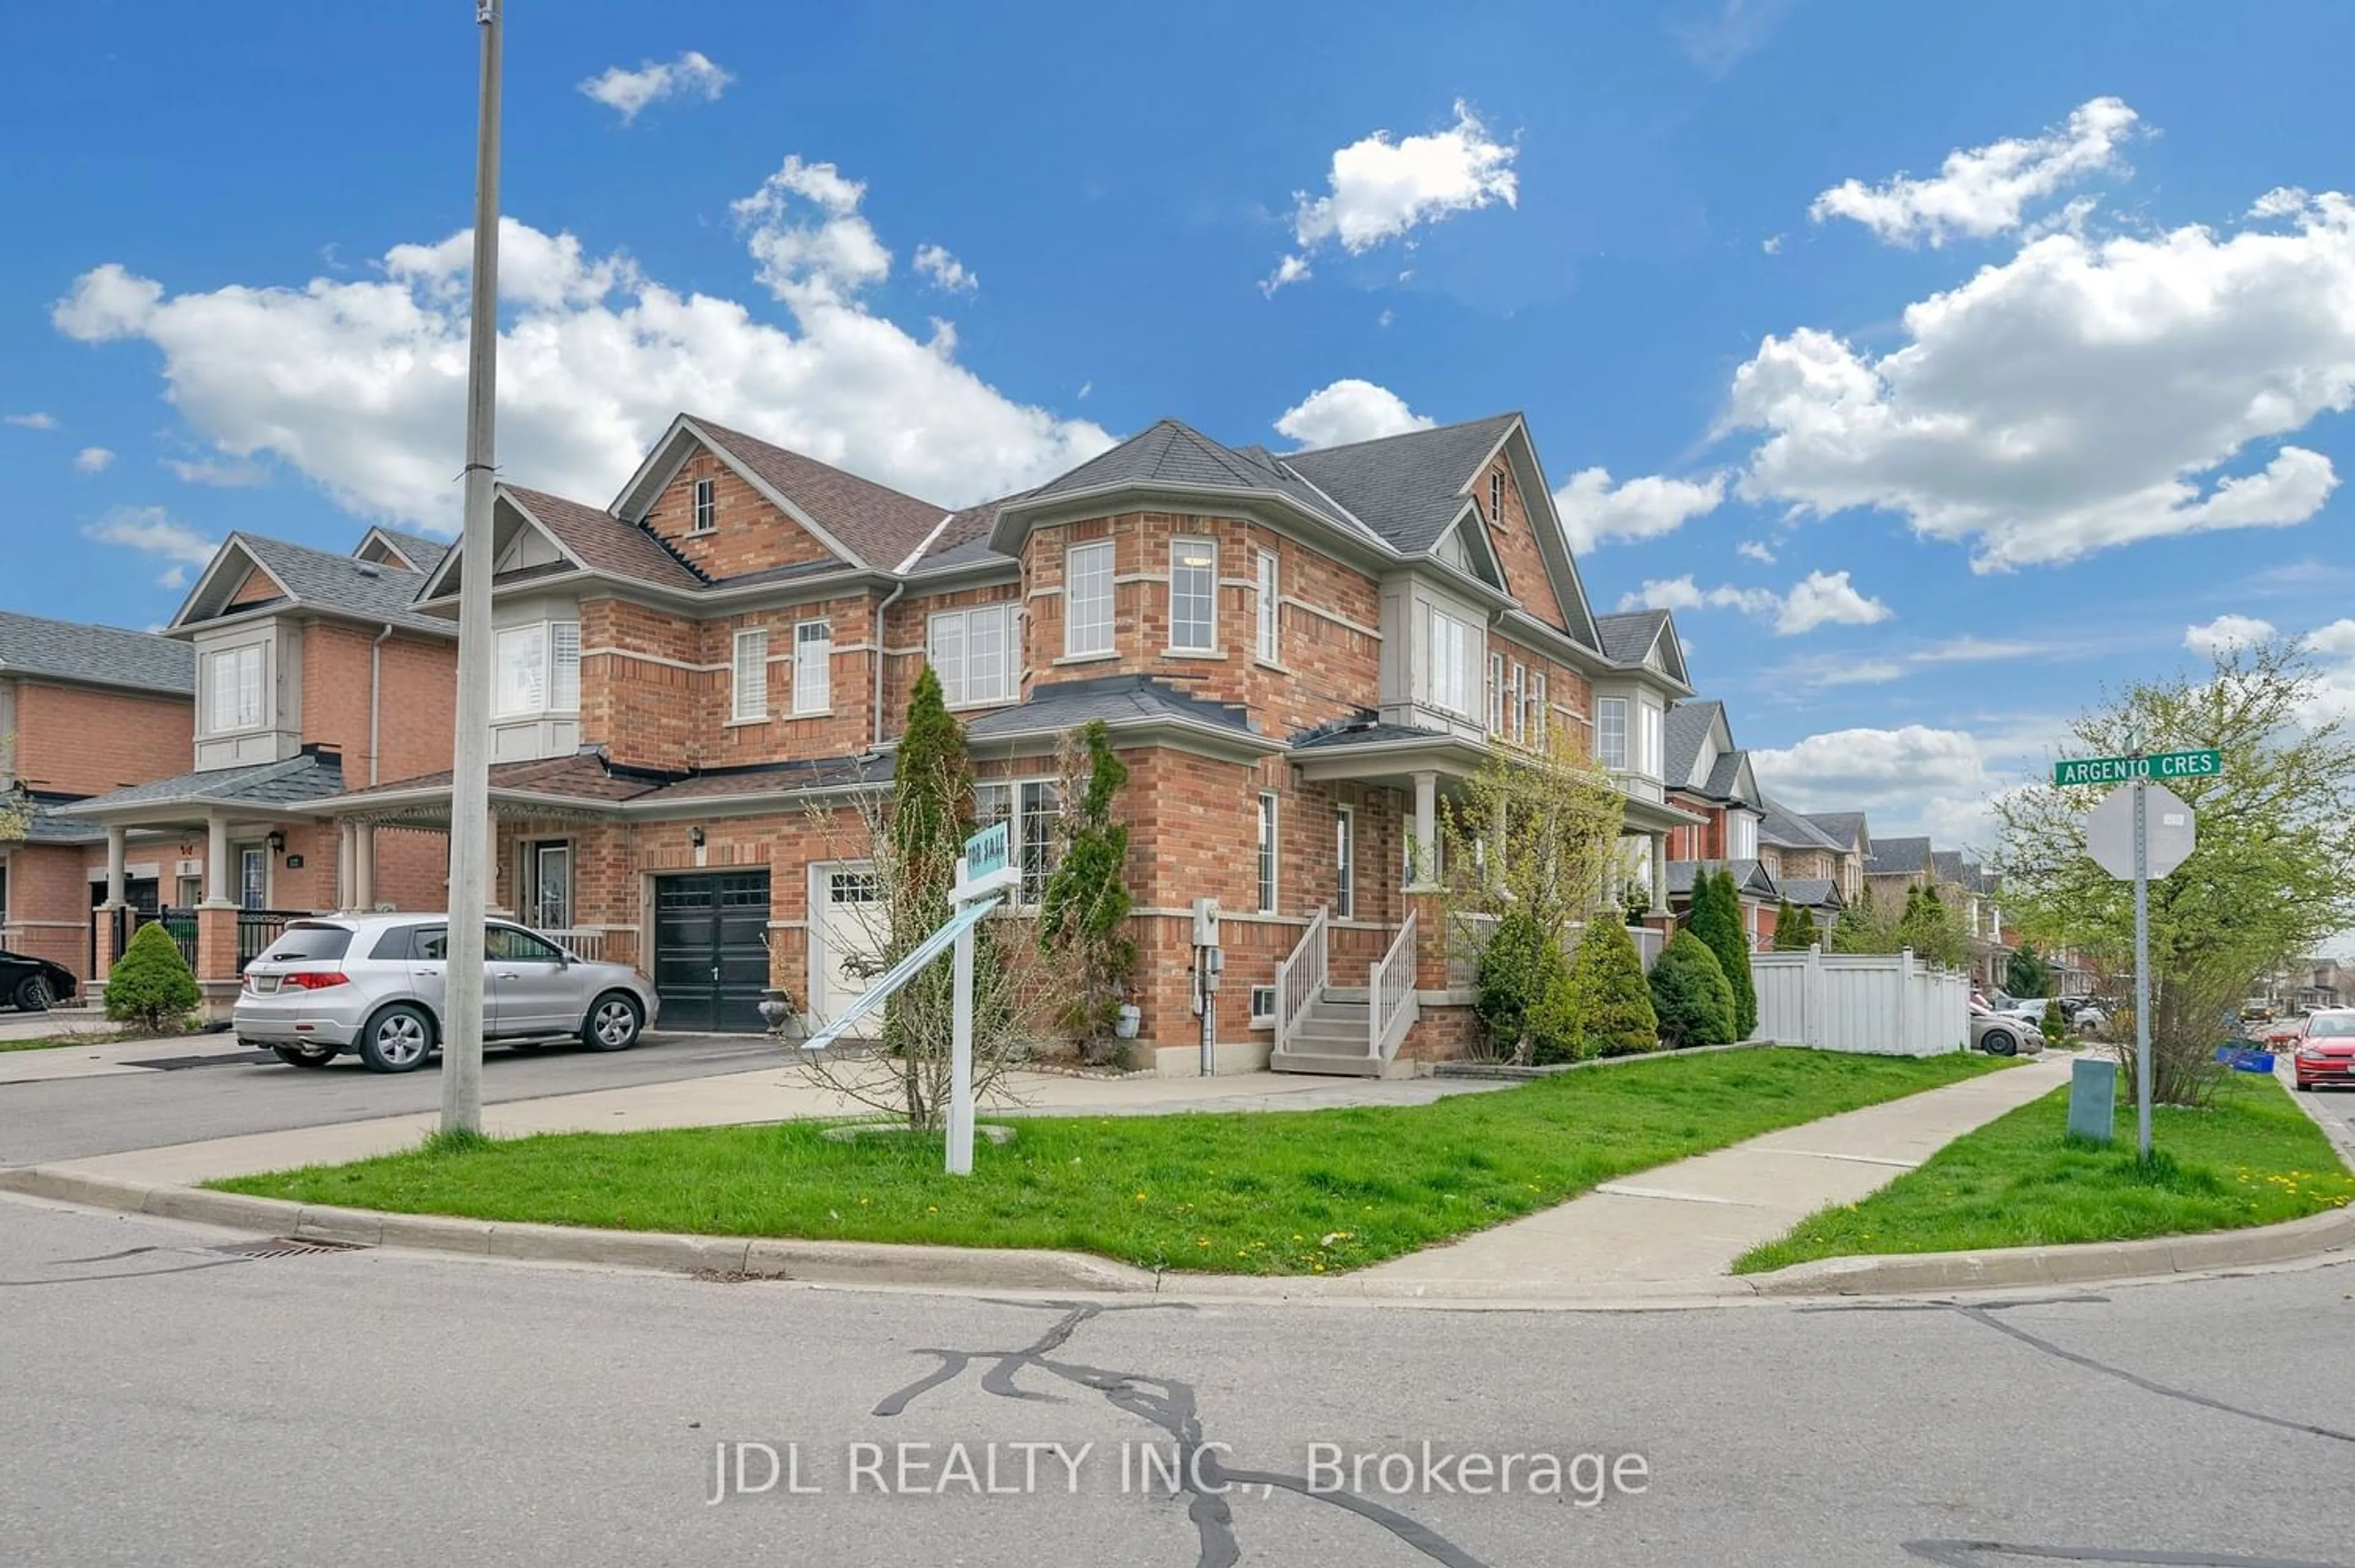 A pic from exterior of the house or condo for 128 Argento Cres, Vaughan Ontario L4H 0B7